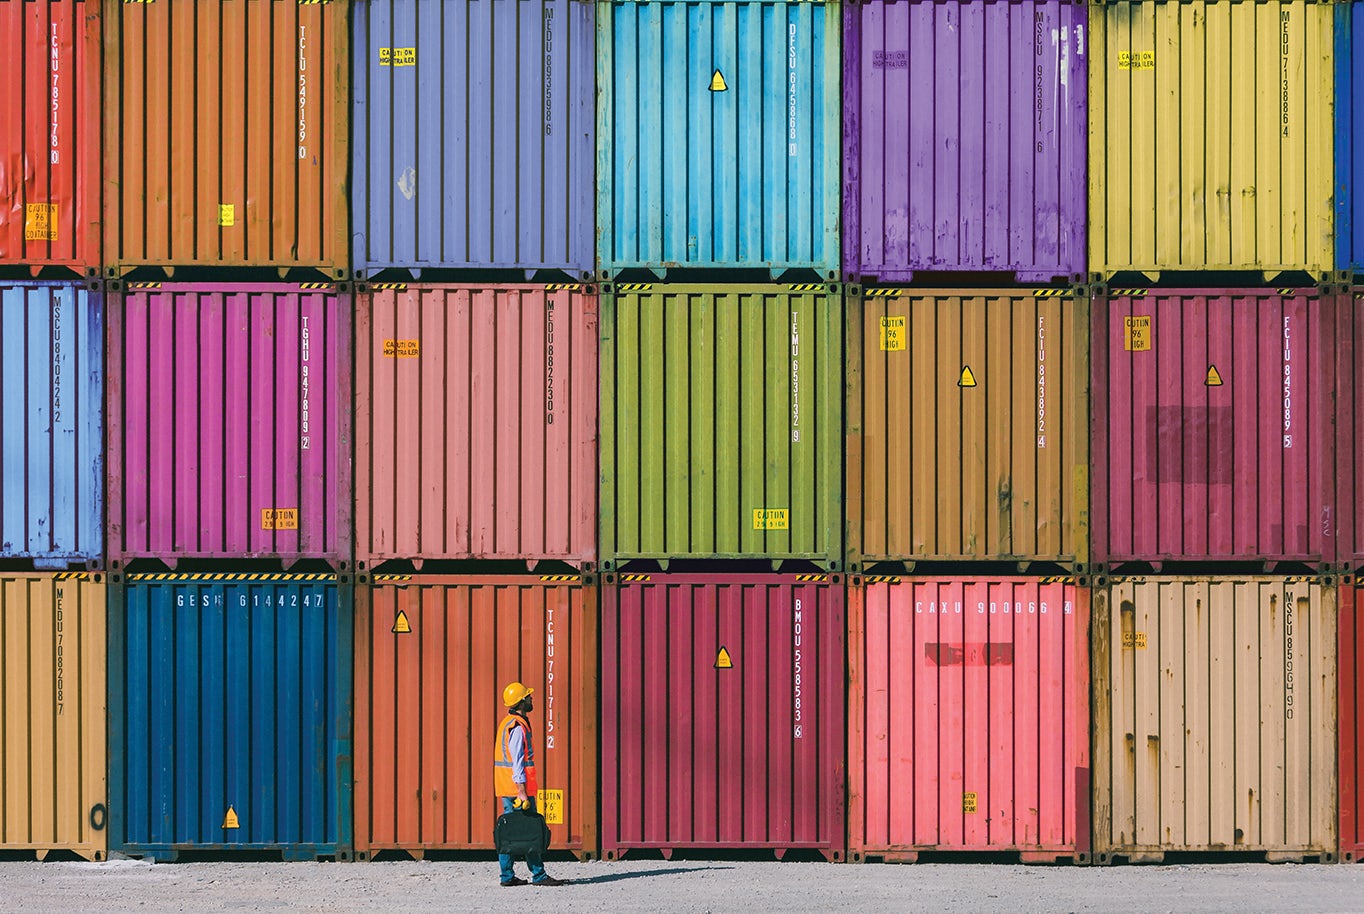 Storage containers and a person